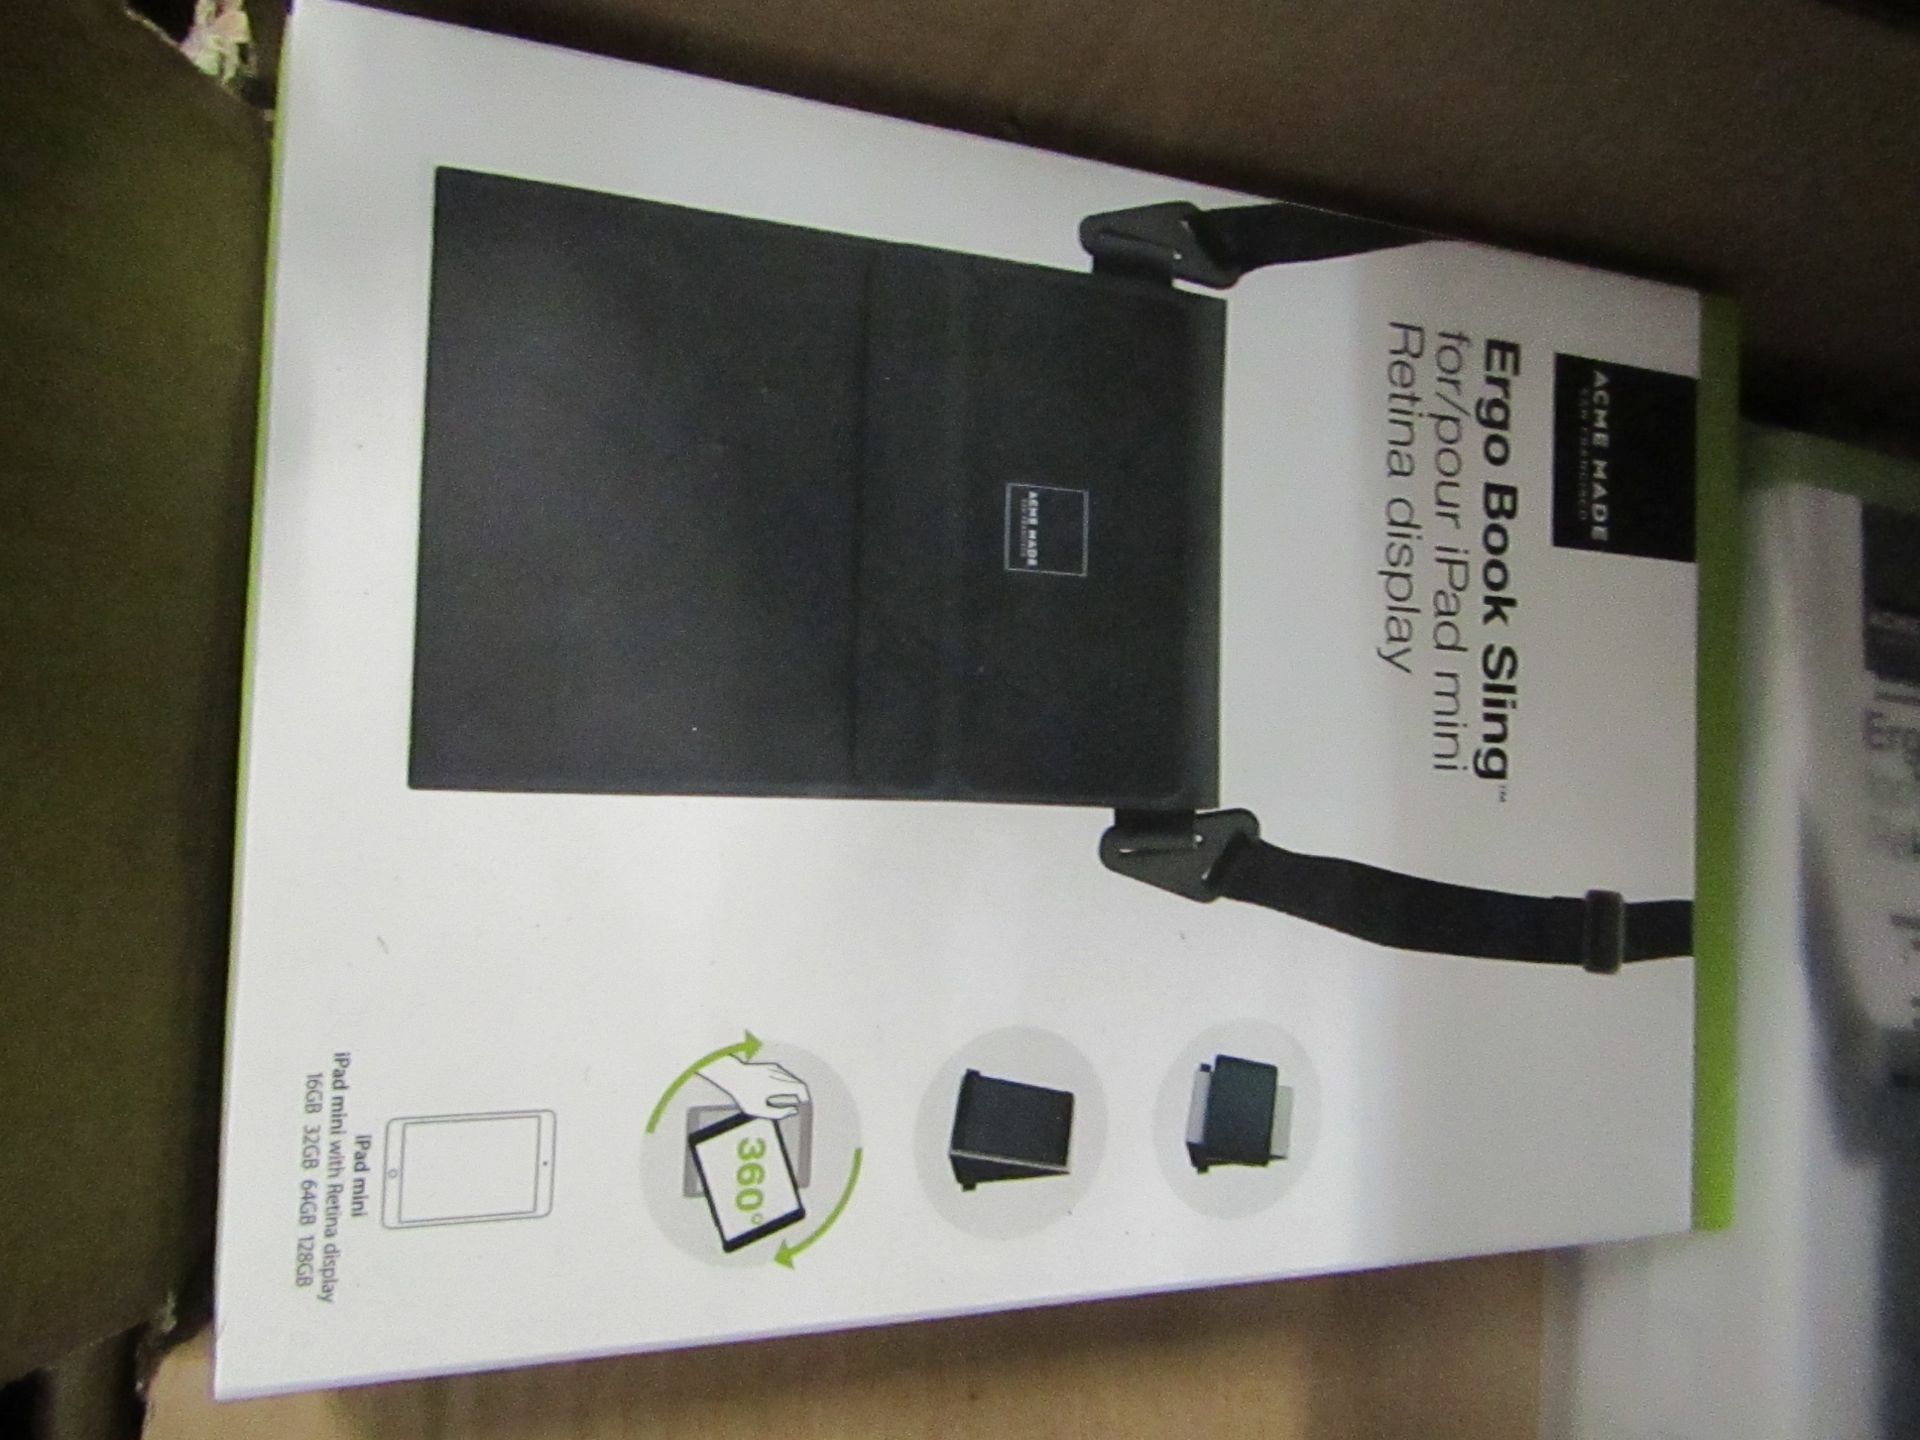 Acme Made The Ergo Book Sling for ipad mini Retina display 360 degree rotation new & packaged